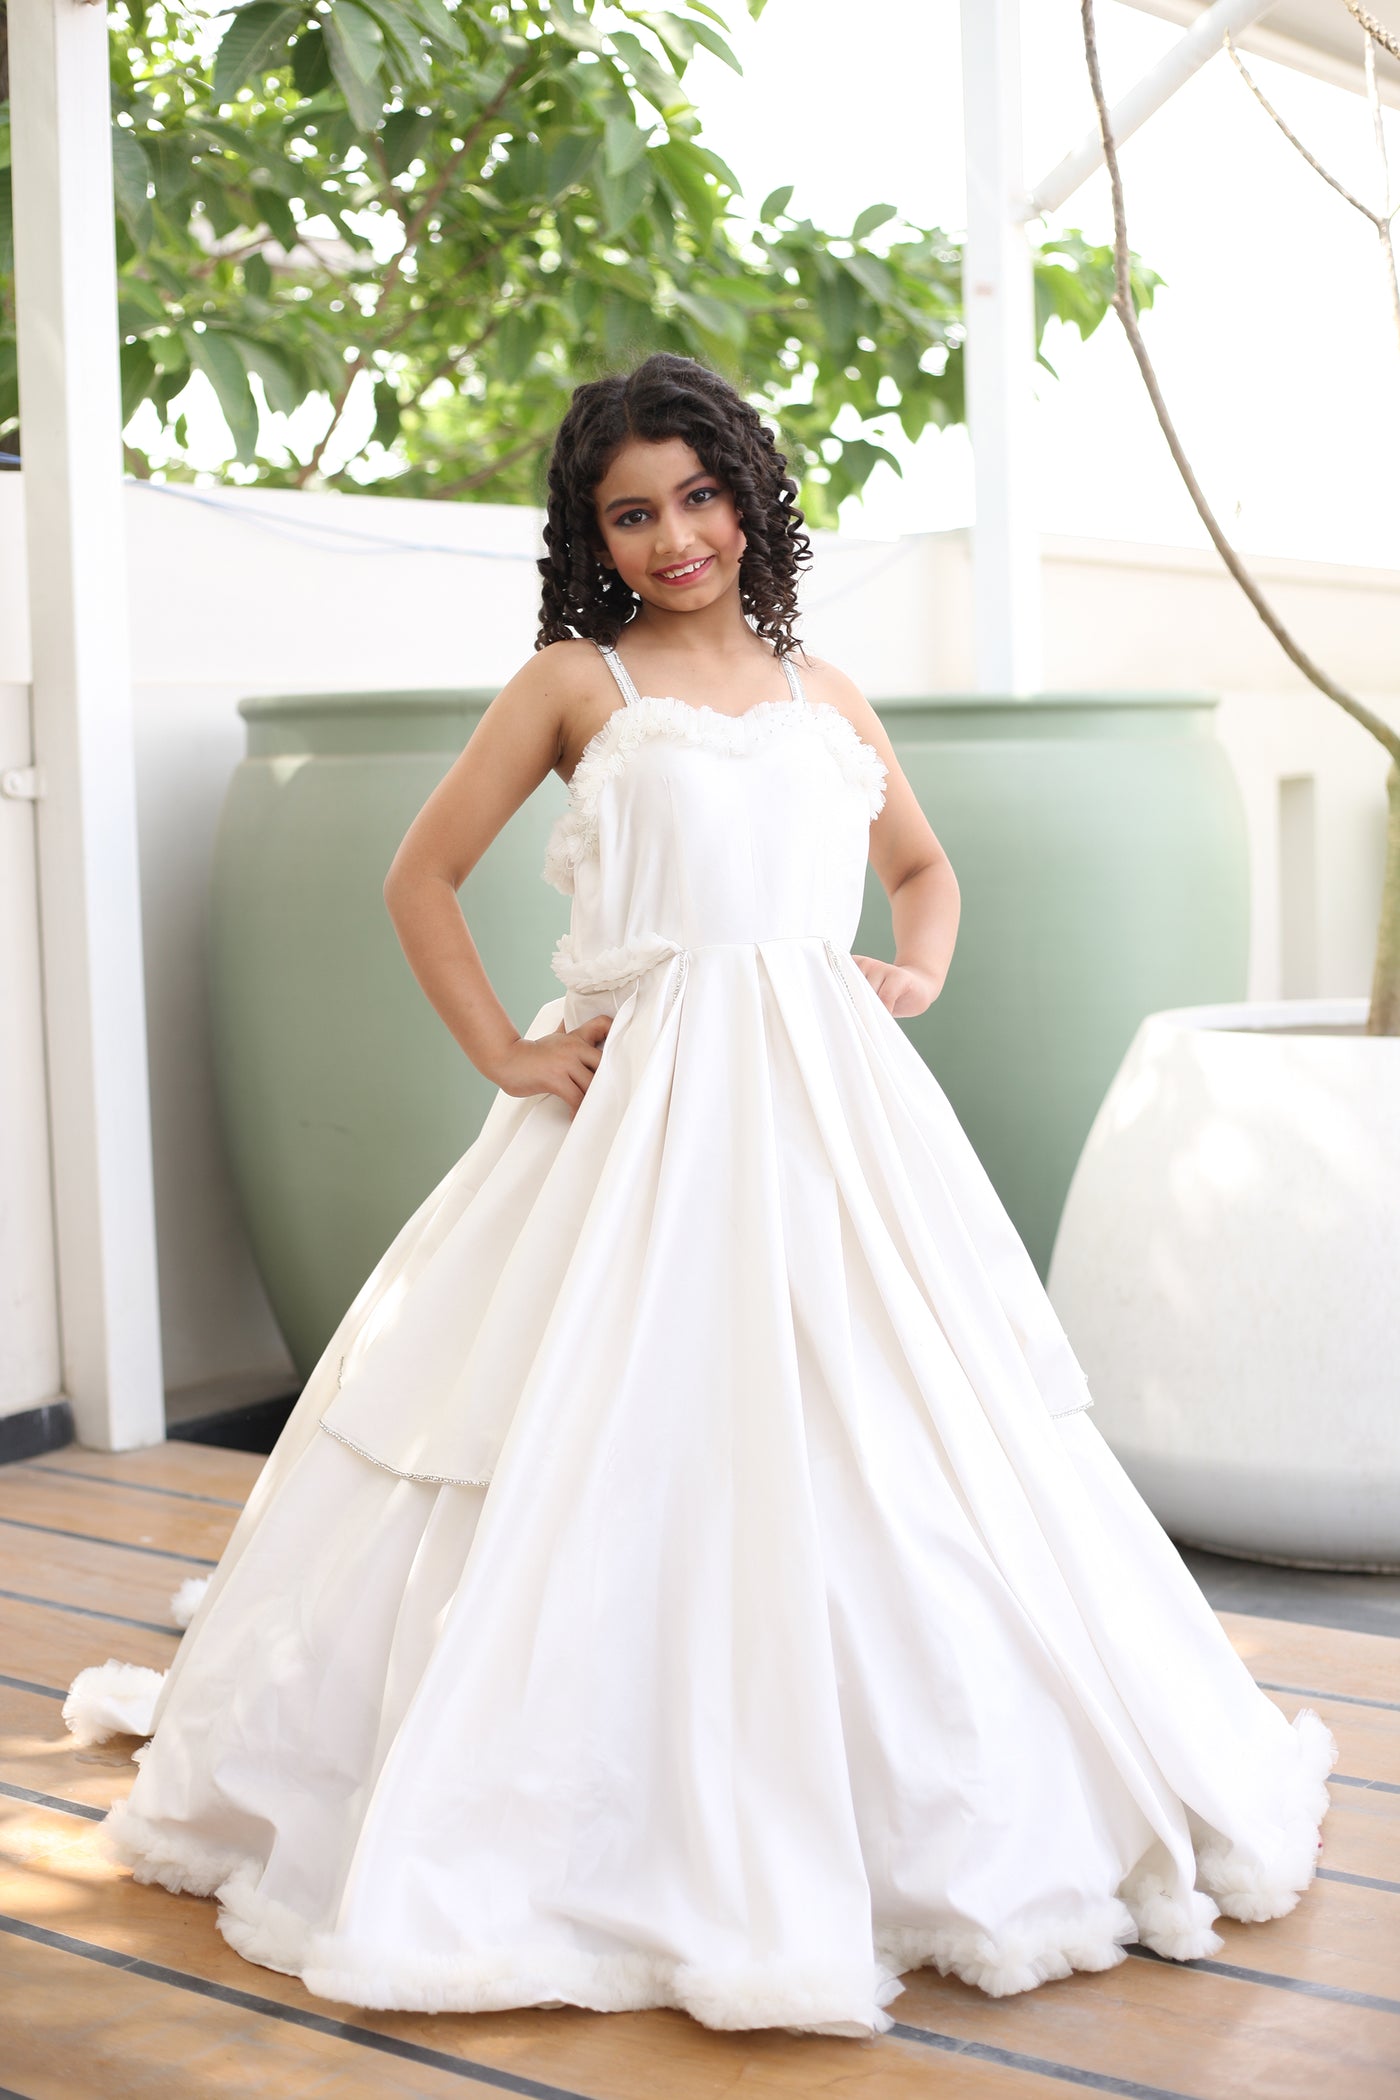 Girls' White Anarkali Gown- Small Indian Clothing in Denver, CO, Aurora, CO, Boulder, CO, Fort Collins, CO, Colorado Springs, CO, Parker, CO, Highlands Ranch, CO, Cherry Creek, CO, Centennial, CO, and Longmont, CO. NATIONWIDE SHIPPING USA- India Fashion X